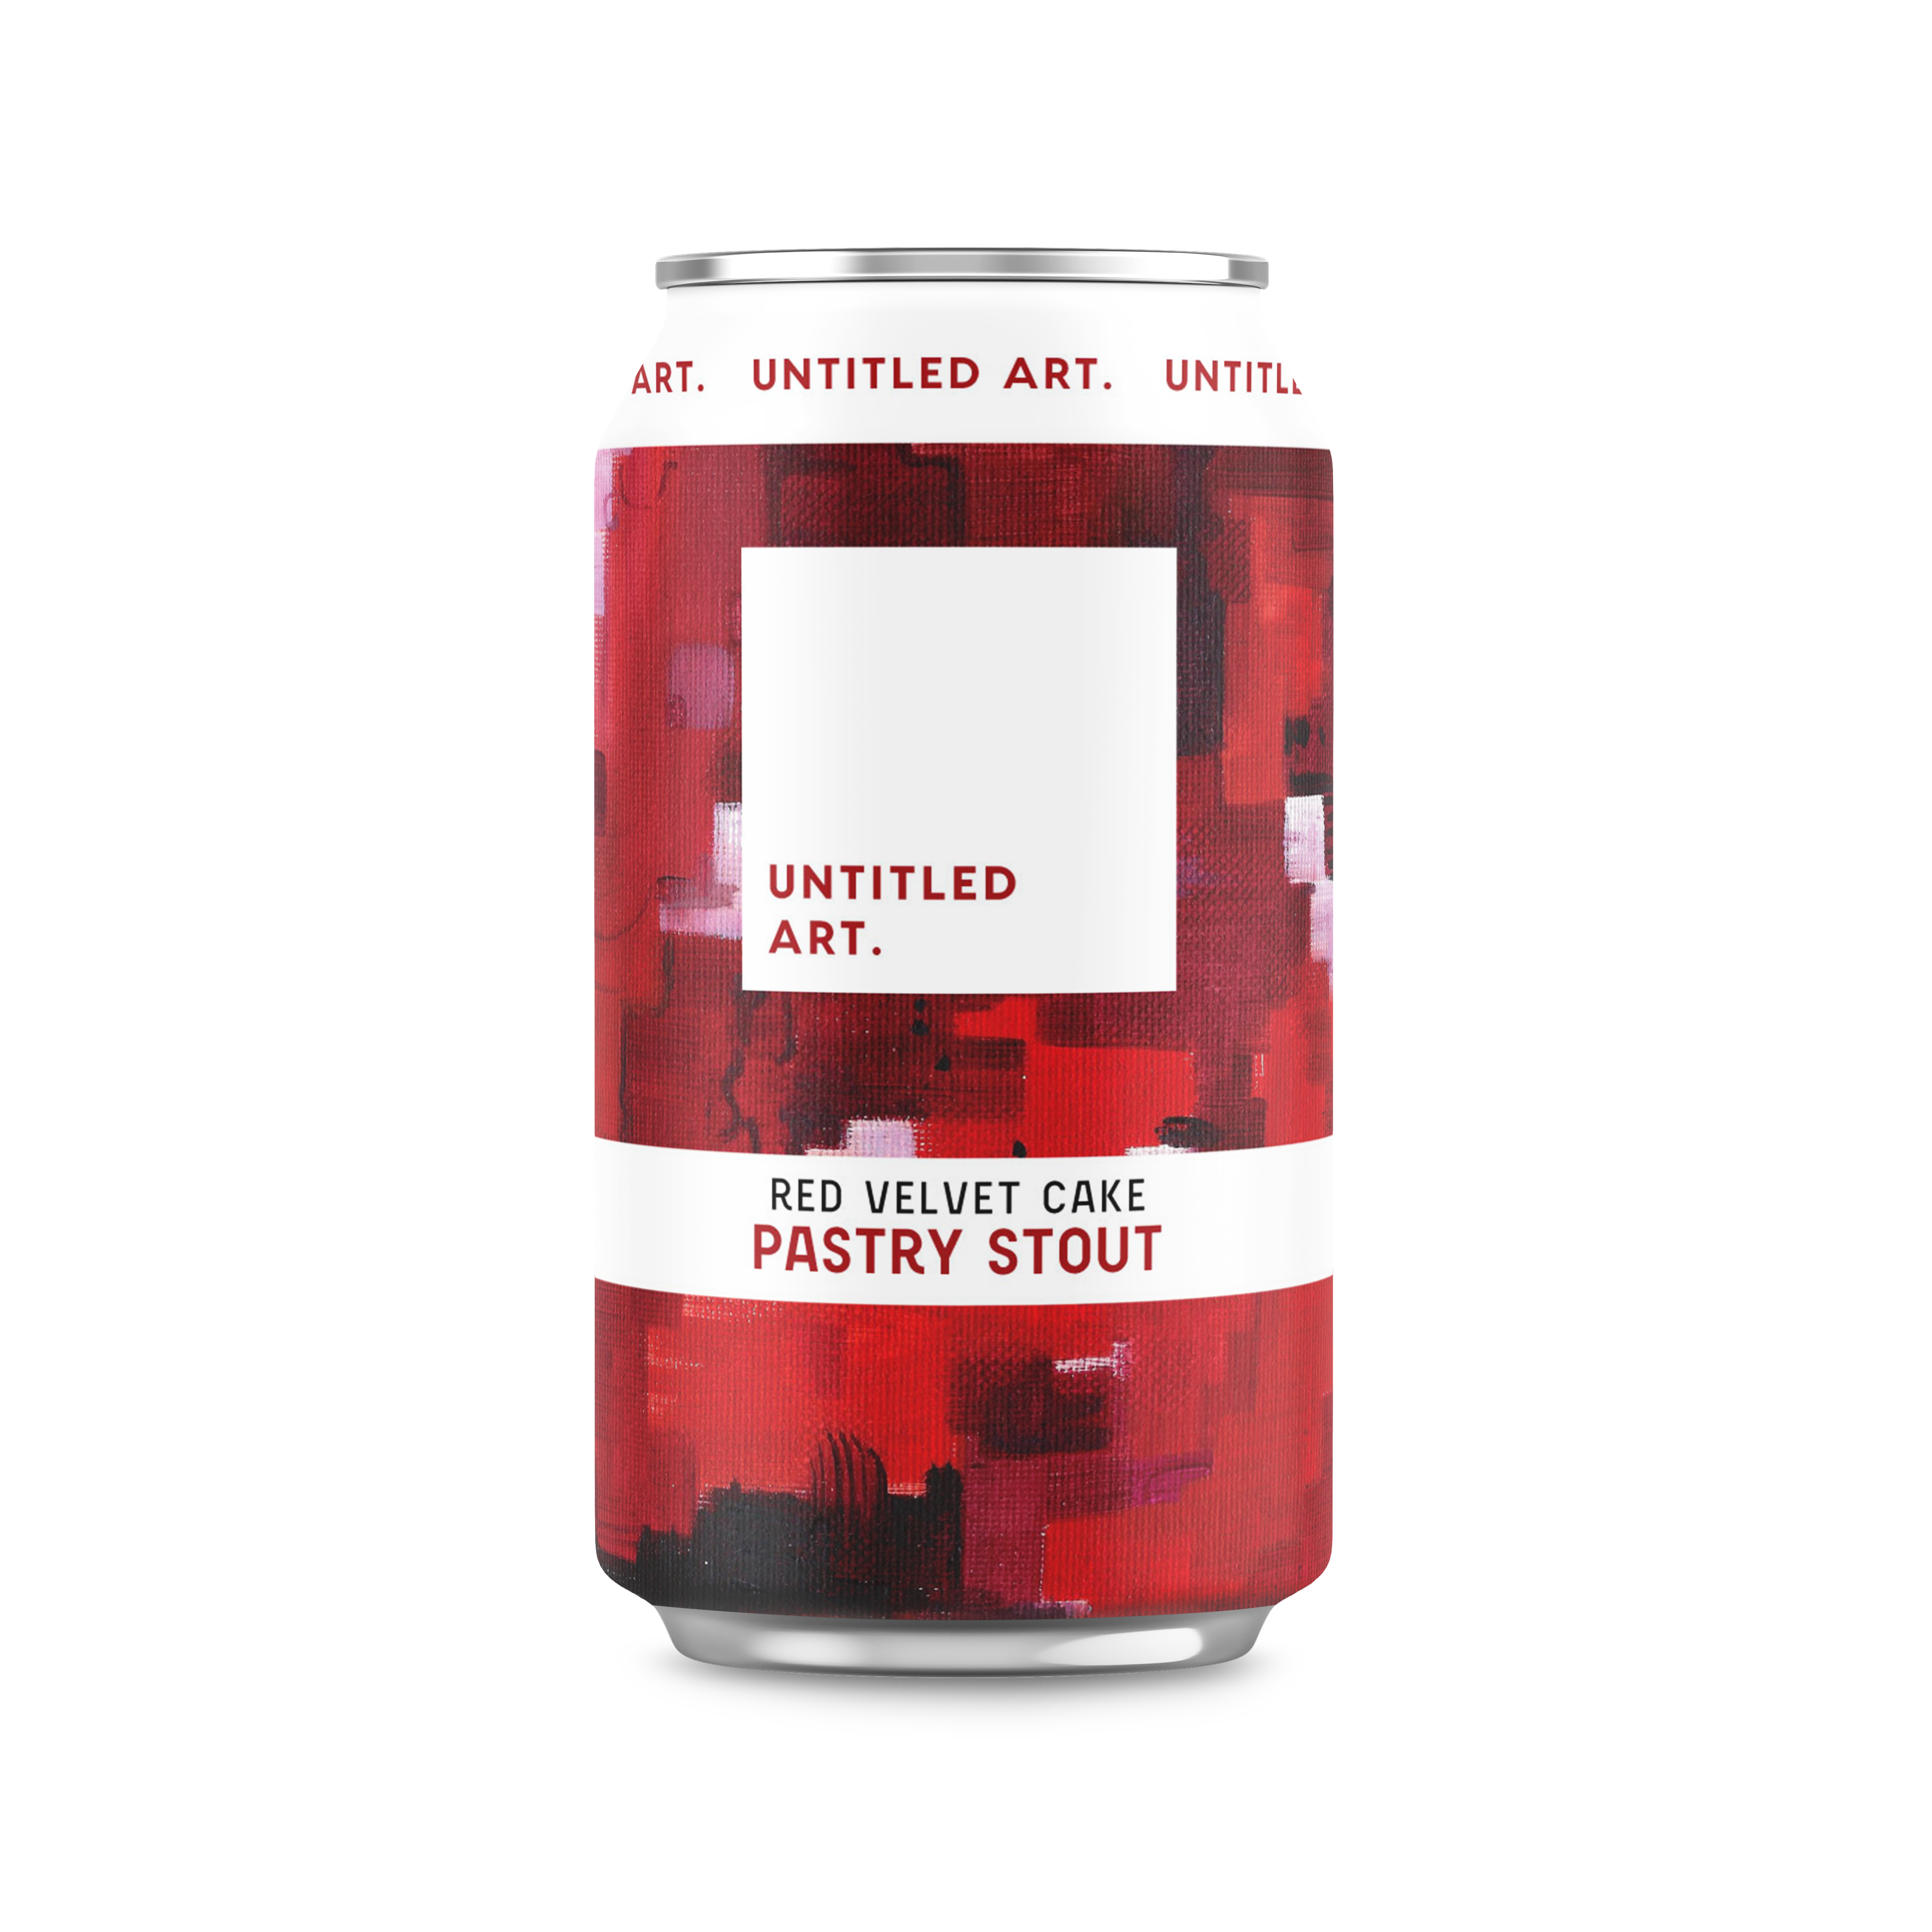 A can of red and white pastry stout.